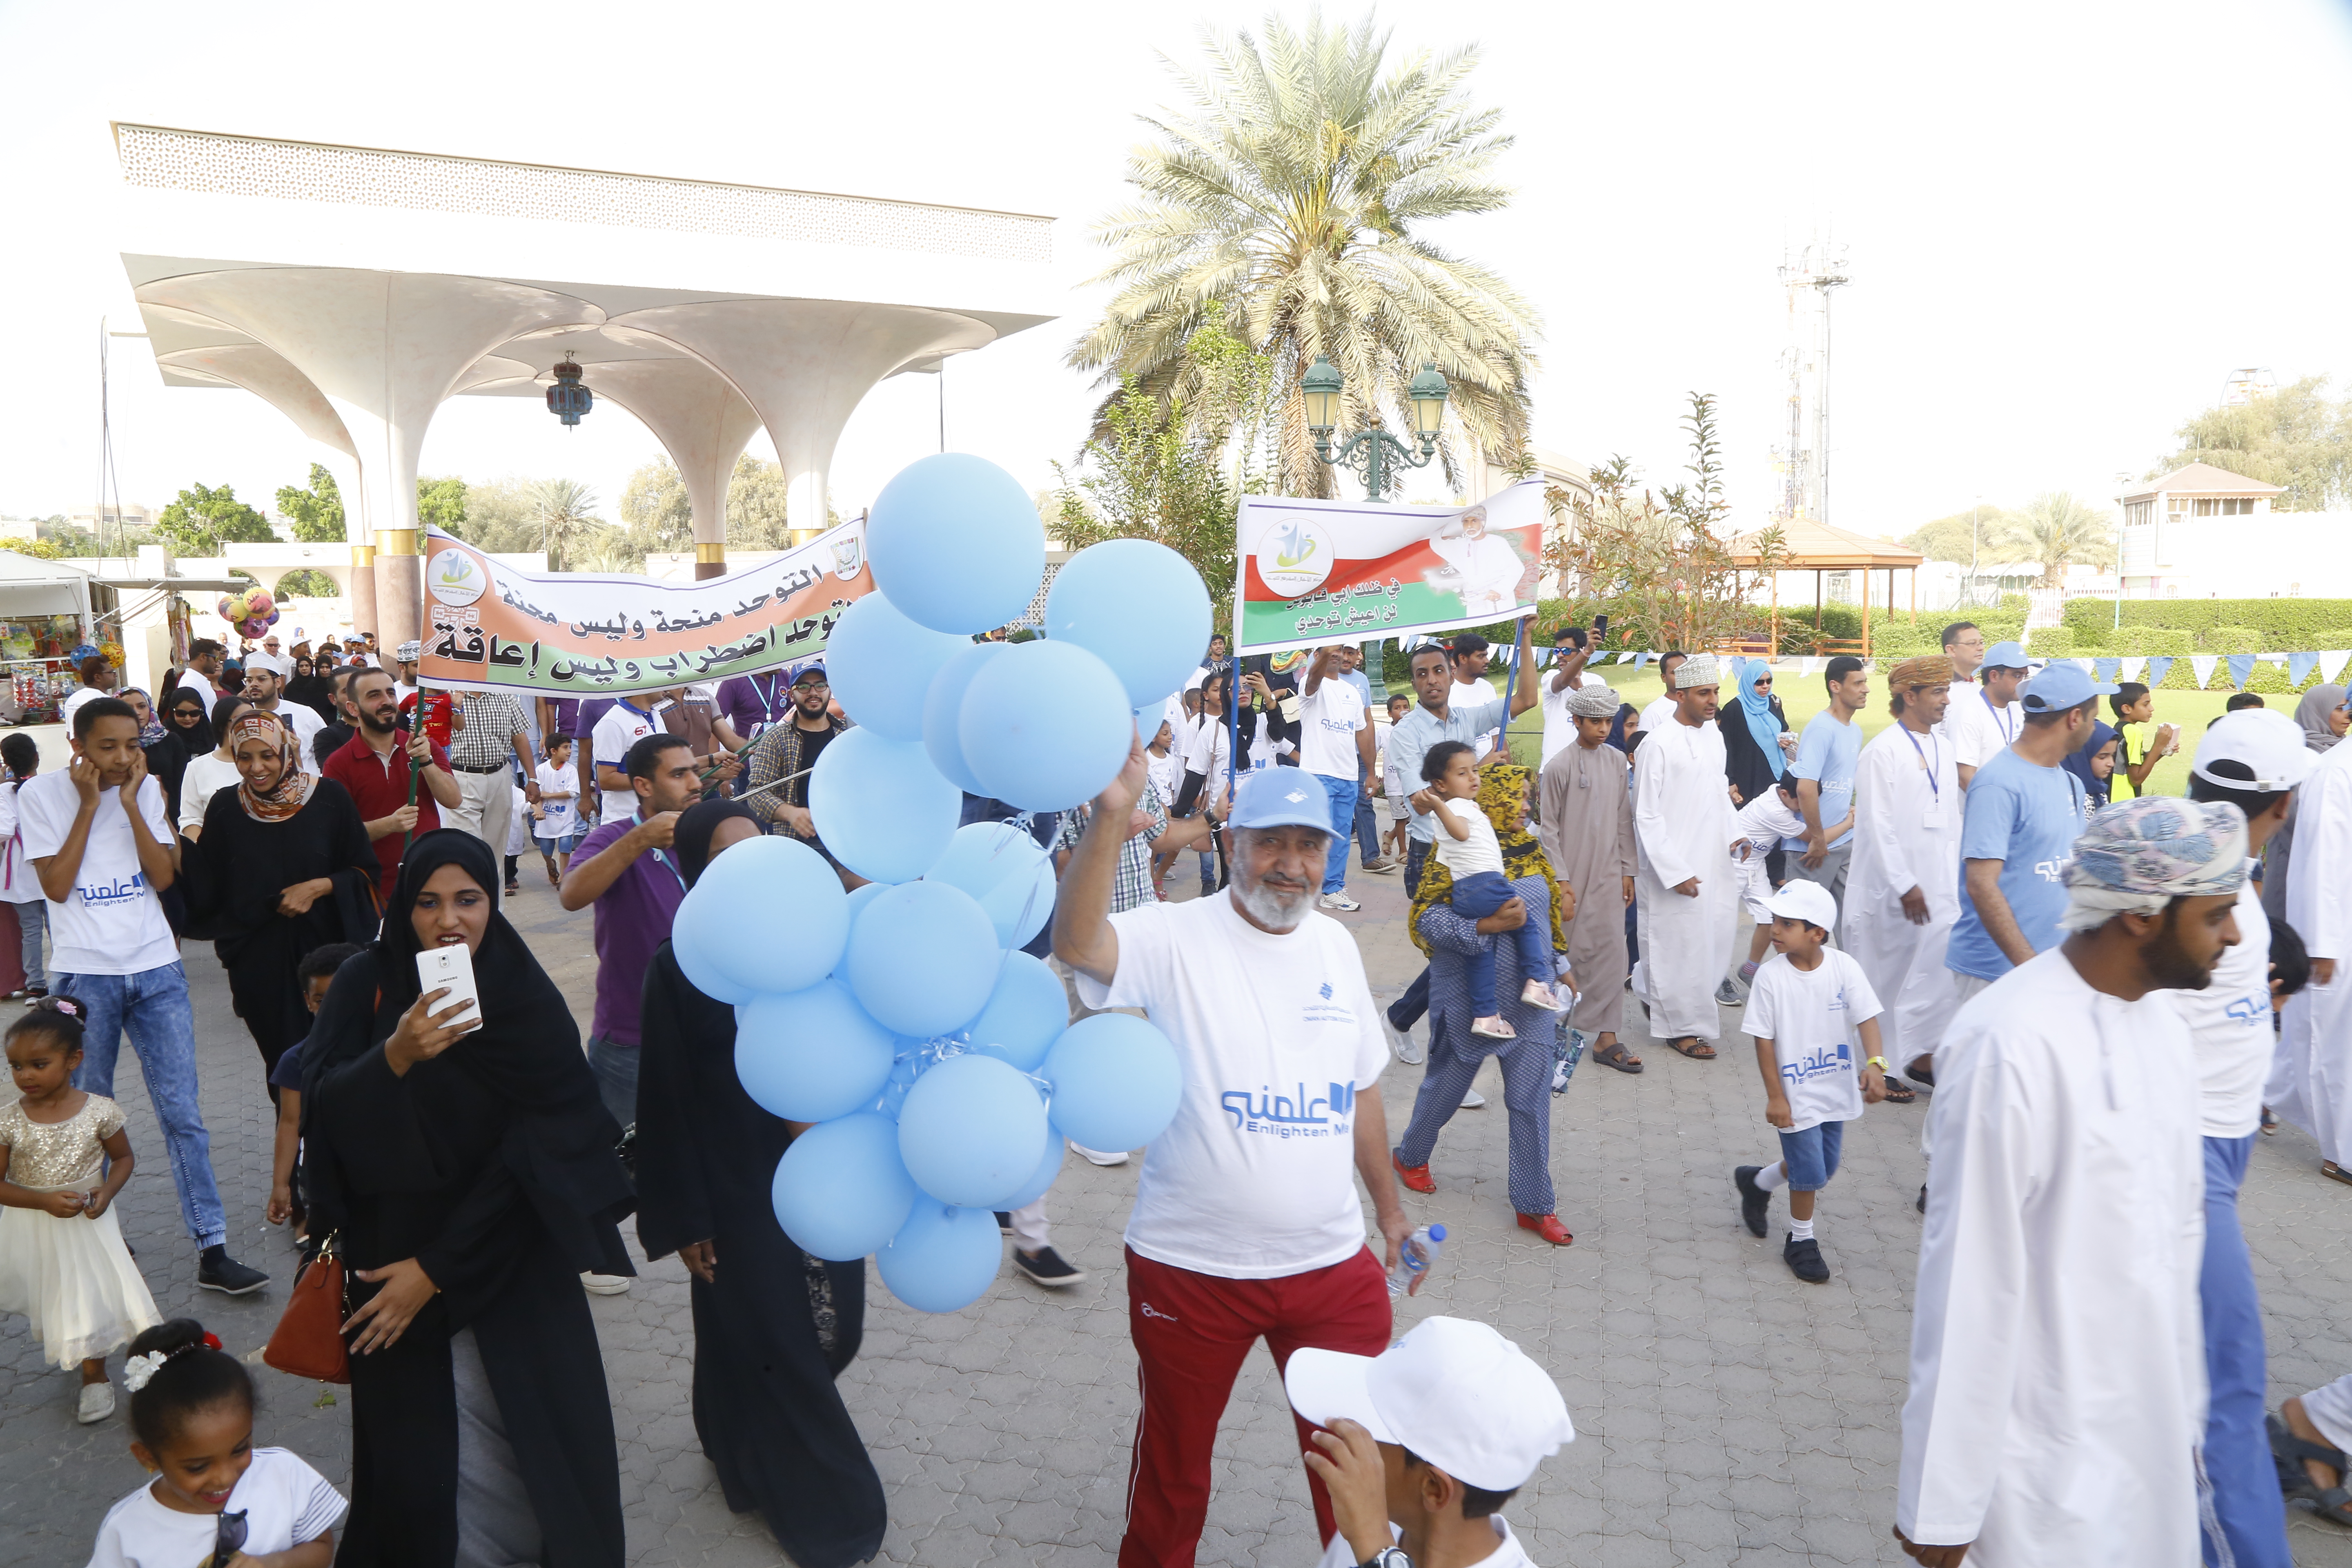 In pictures: Walk for Autism